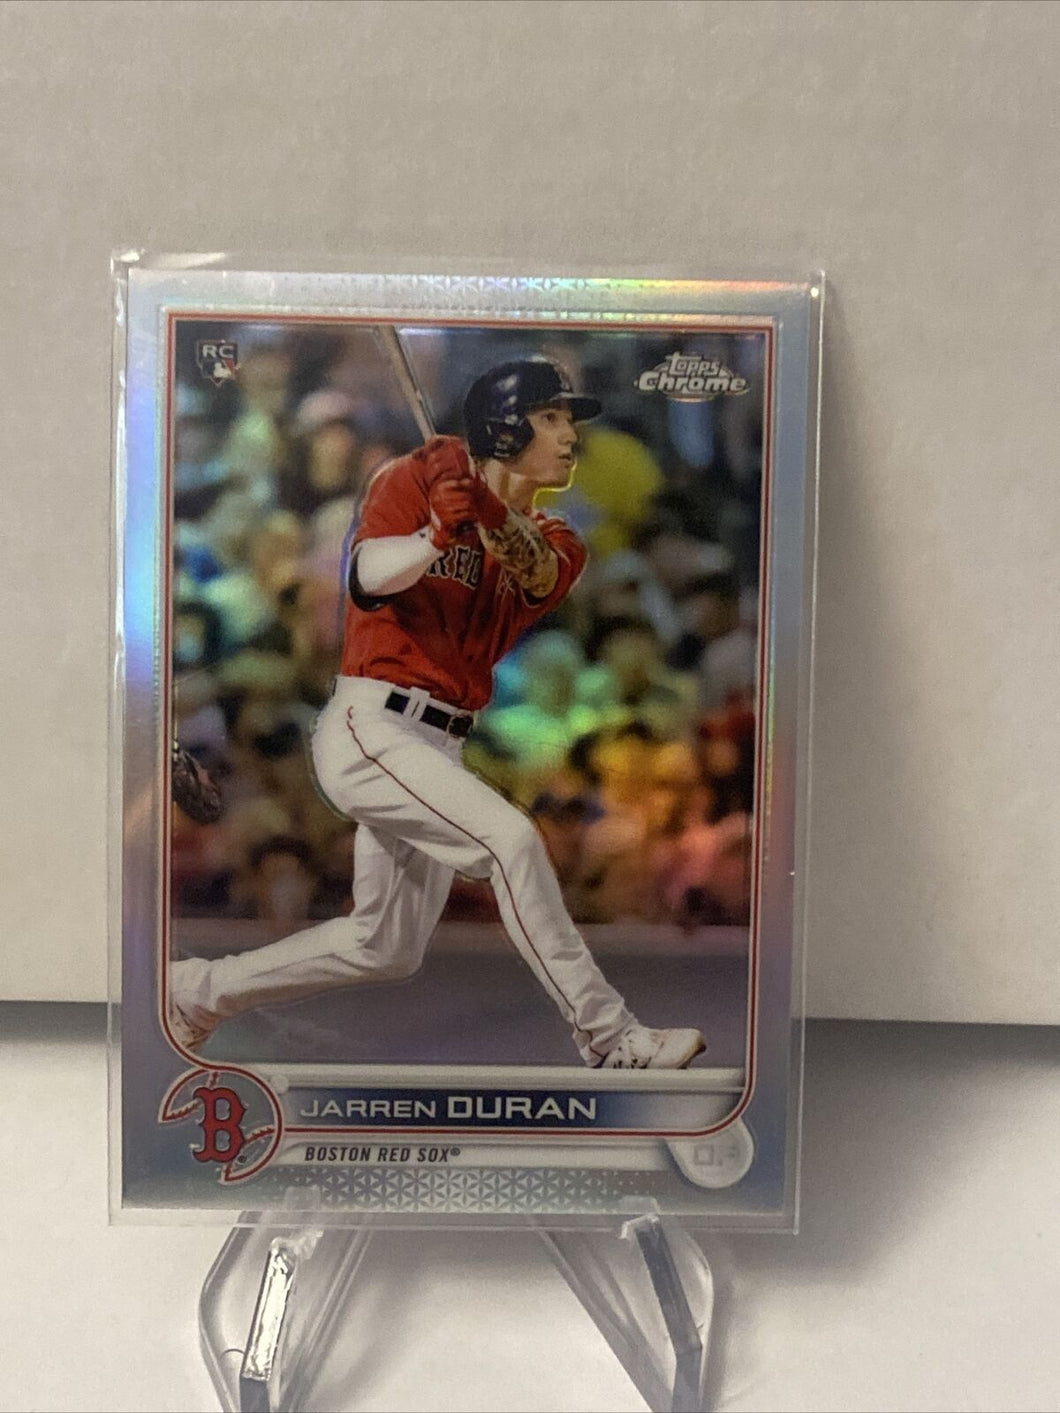 2022 Topps Chrome Jarren Duran Refractor Rookie Card RC #113 Boston Red Sox